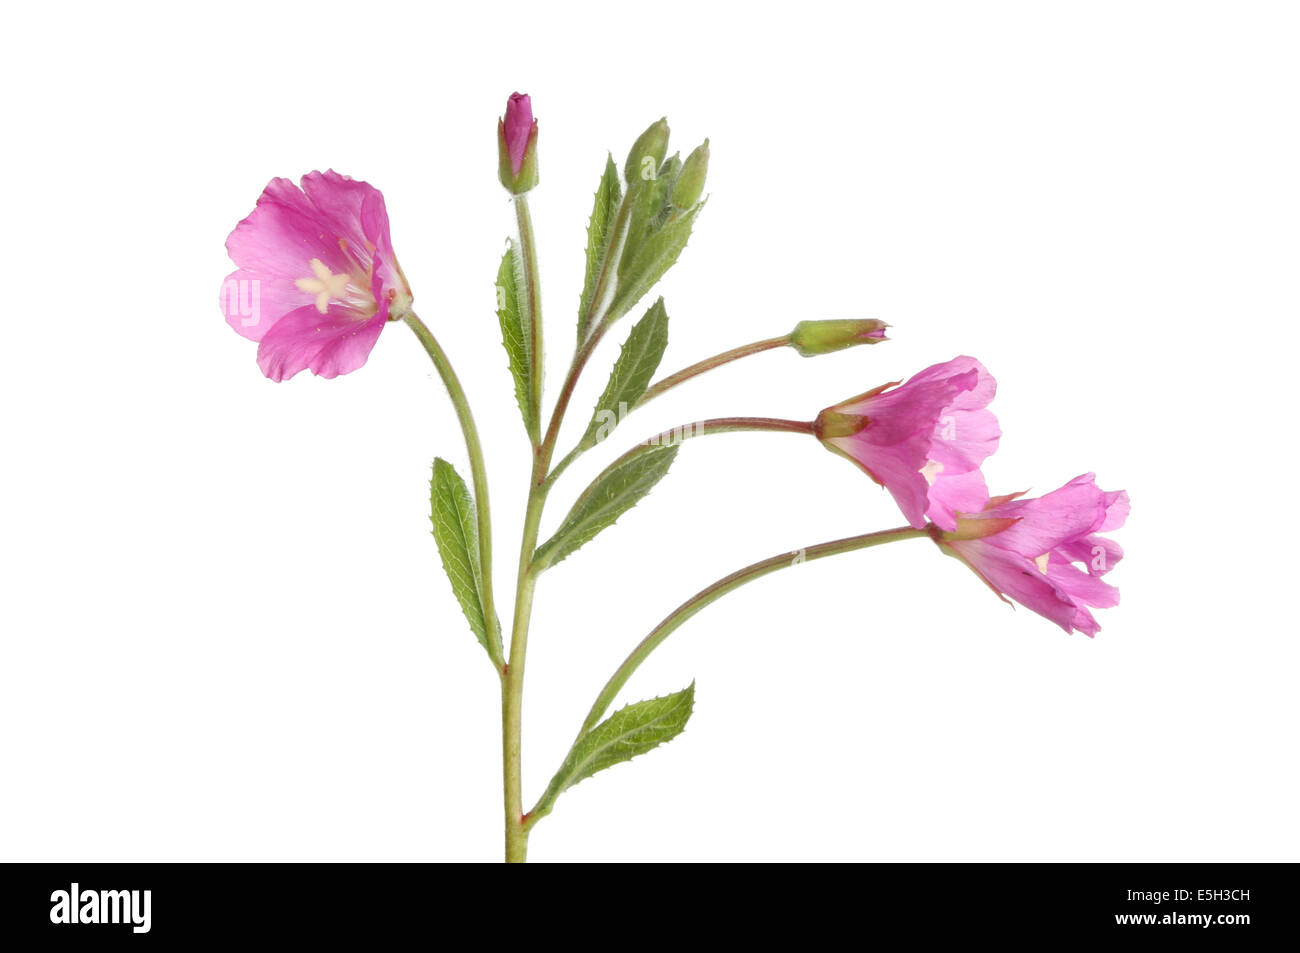 Great Willowherb flowers and foliage isolated against white Stock Photo